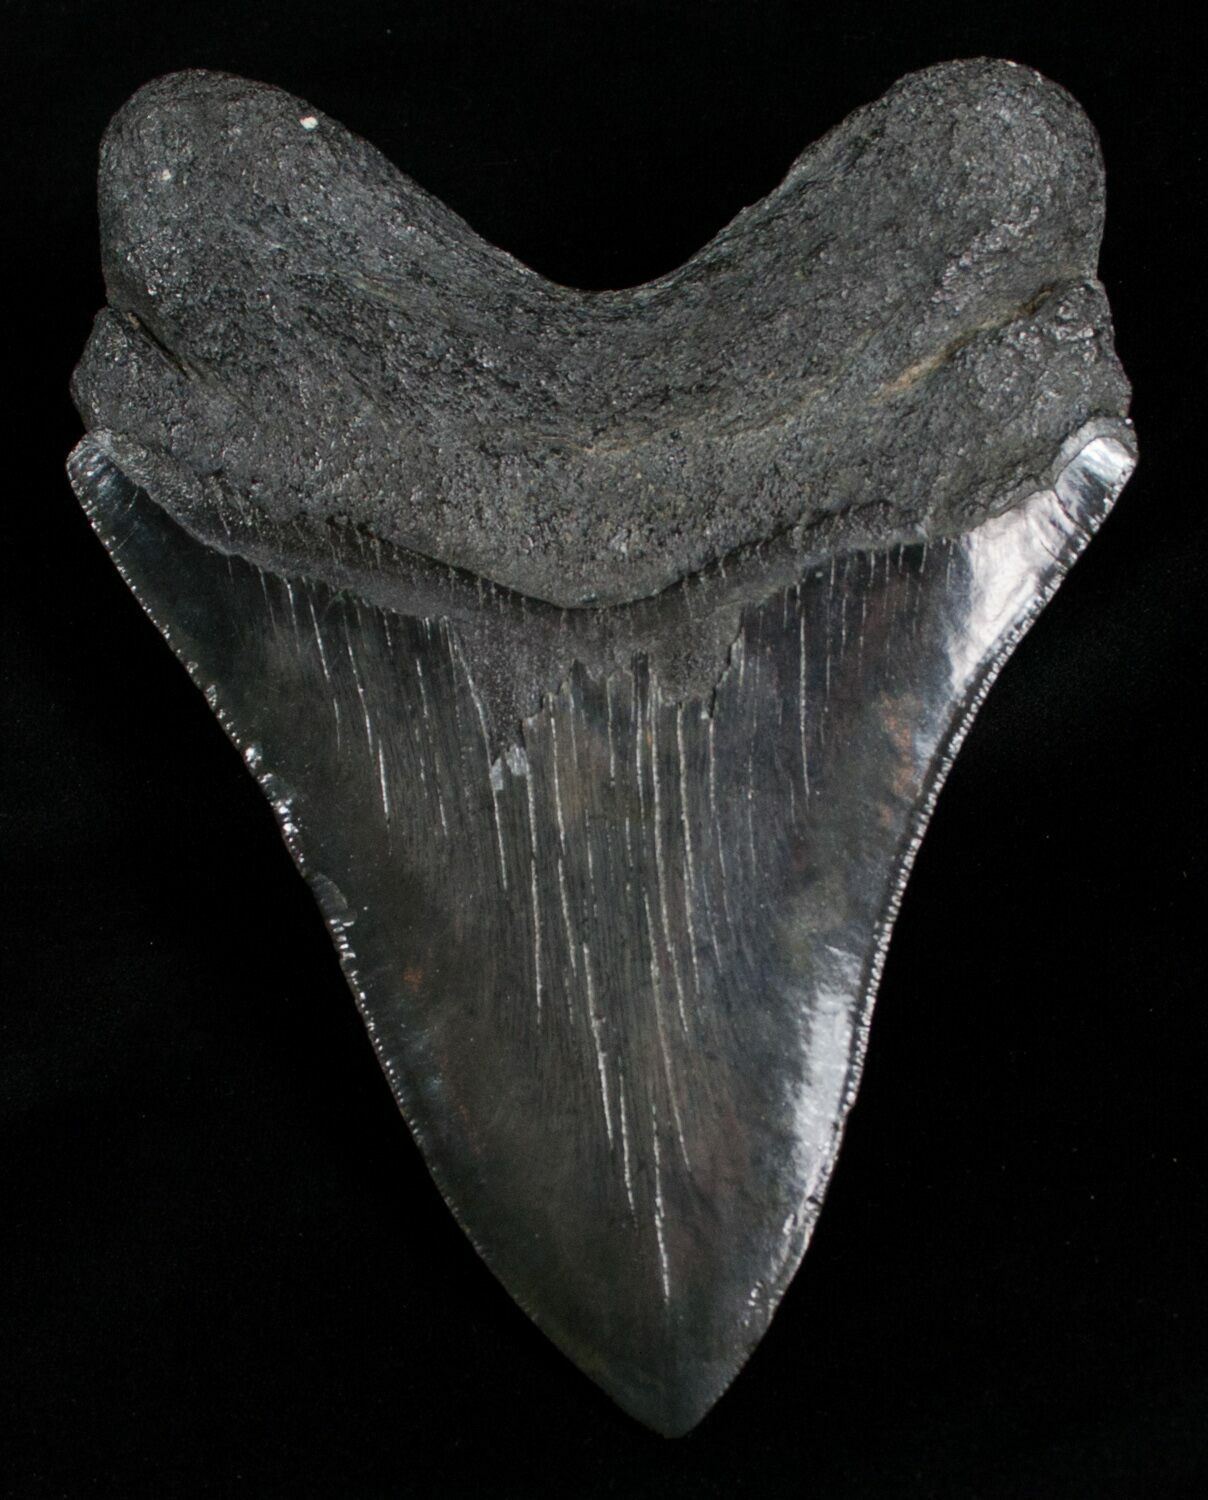 5.39 Inch Black Megalodon Shark Tooth For Sale (#4319) - FossilEra.com